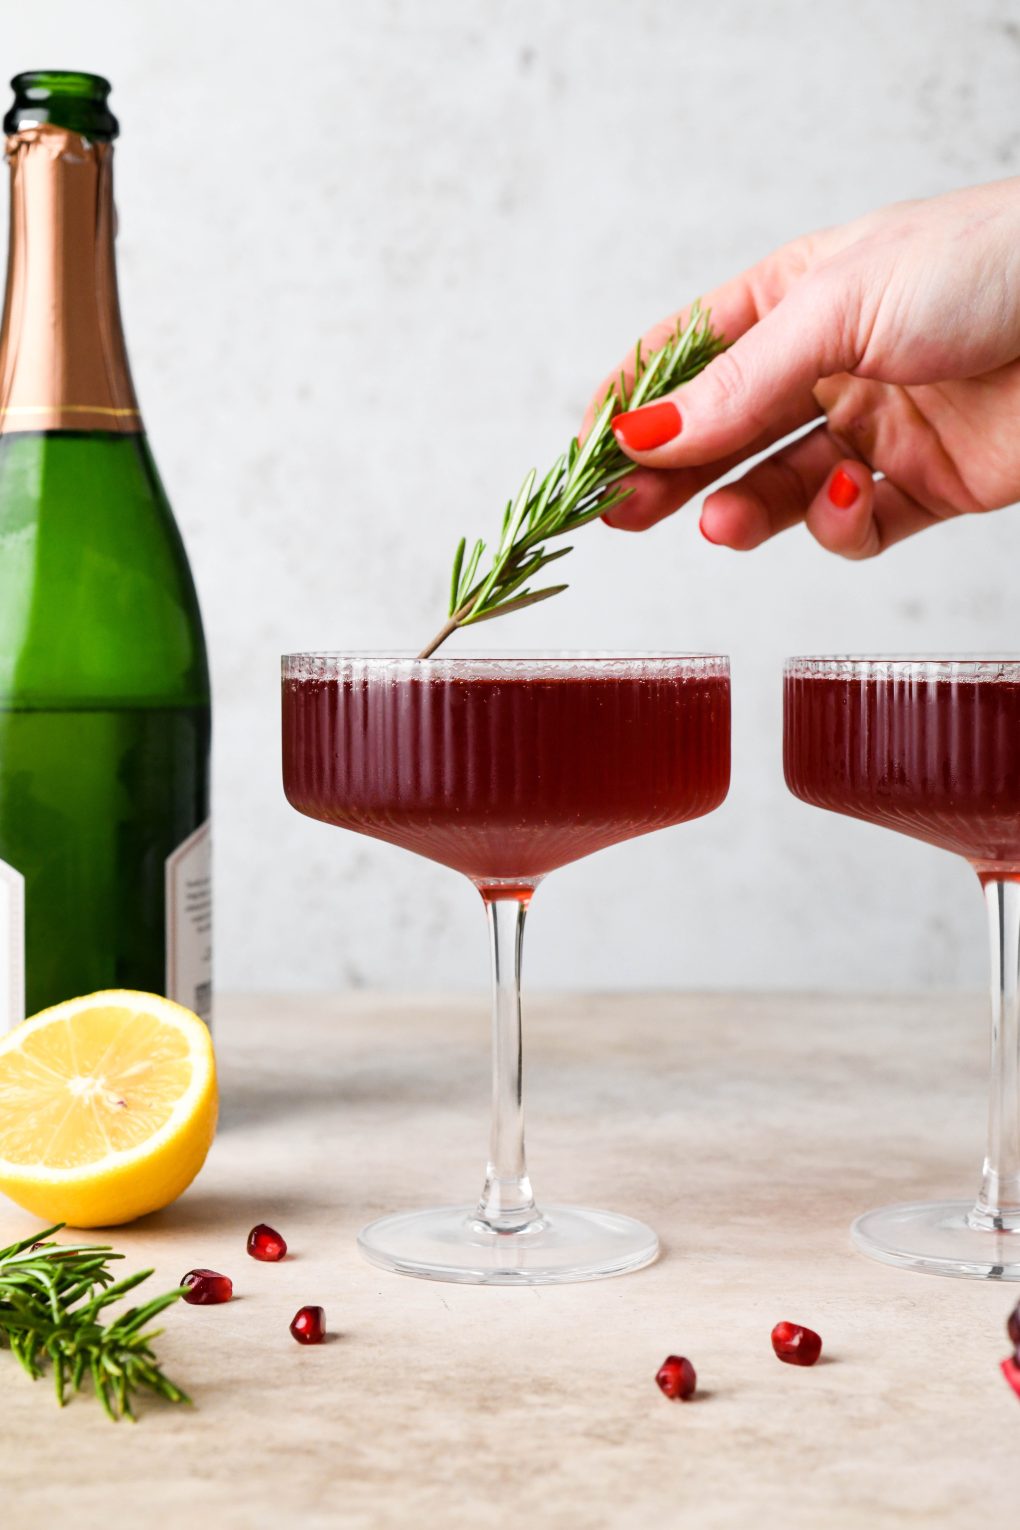 How to make Festive Pomegranate Champagne Cocktail: Topping the cocktail with a sprig of rosemary